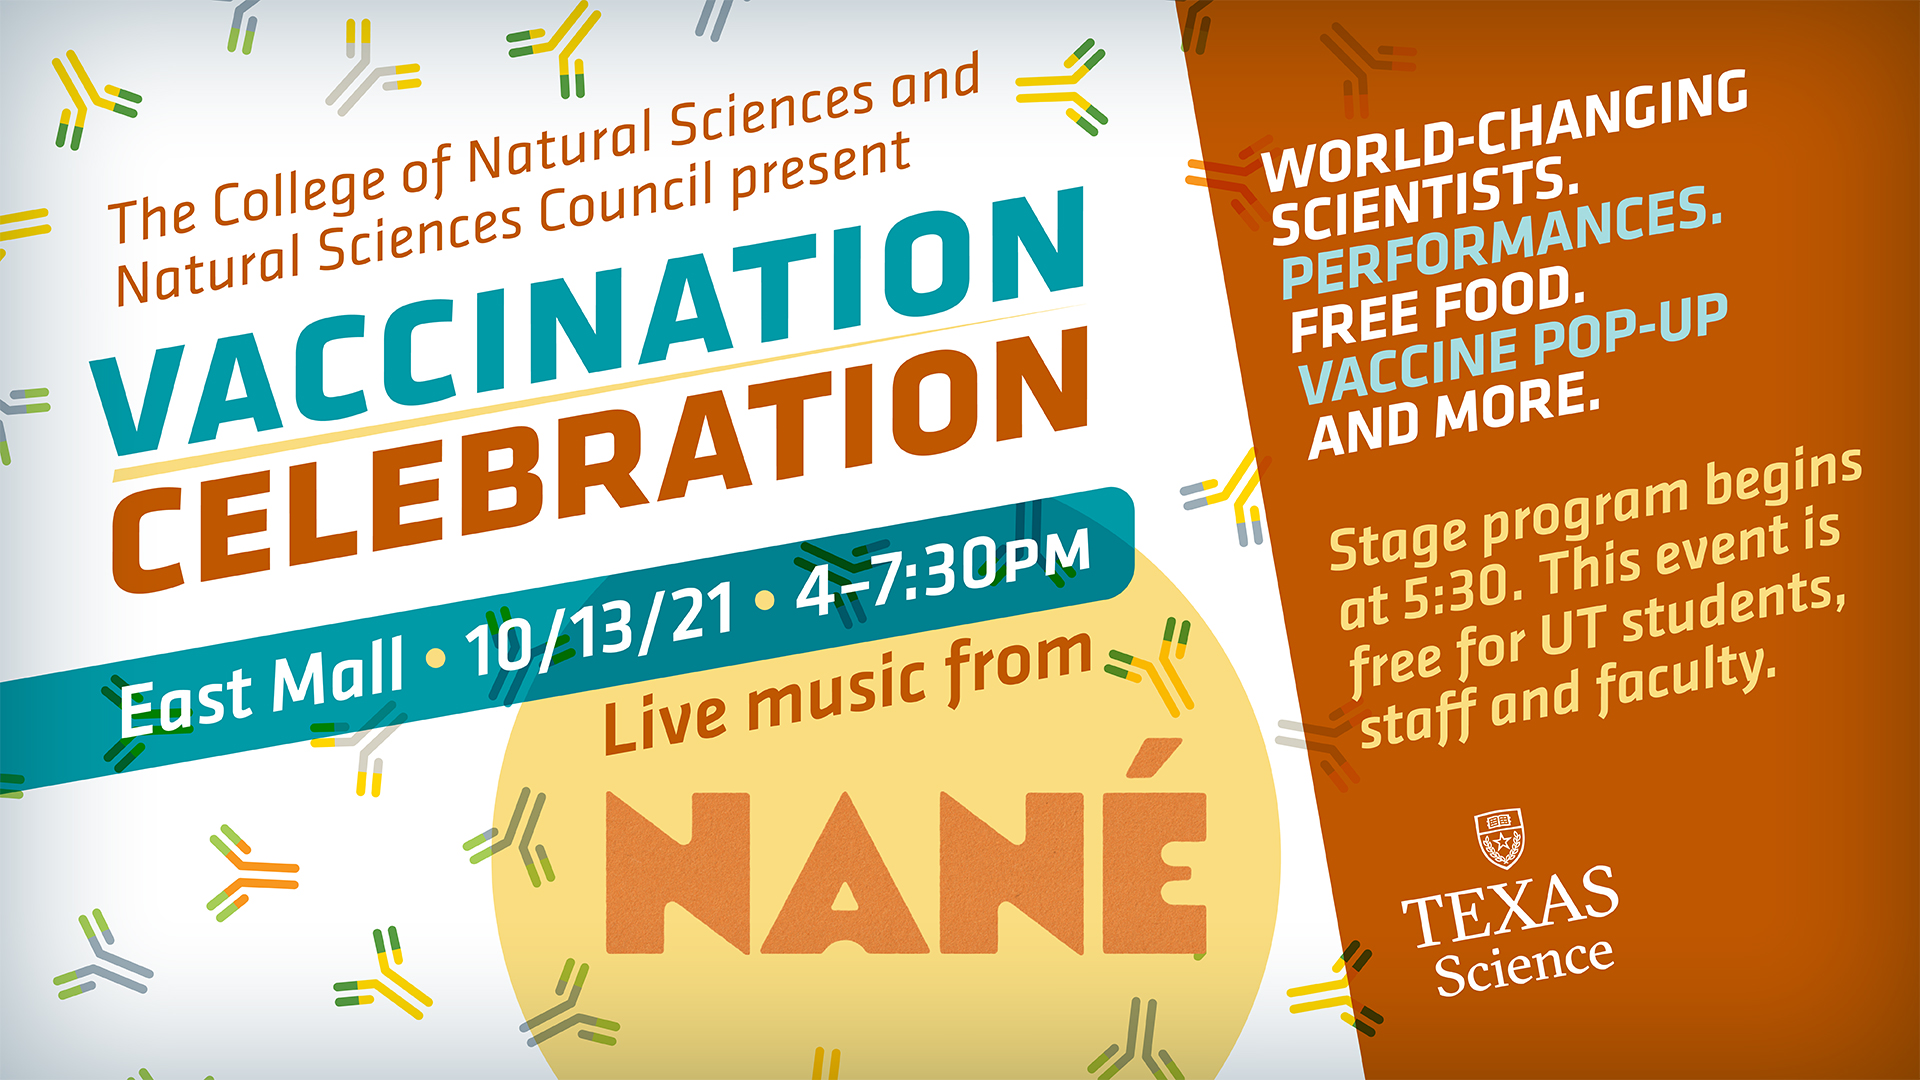 Vaccination Celebration • East Mall • 10/13/21 • 4-7:30pm • Live music from Nané